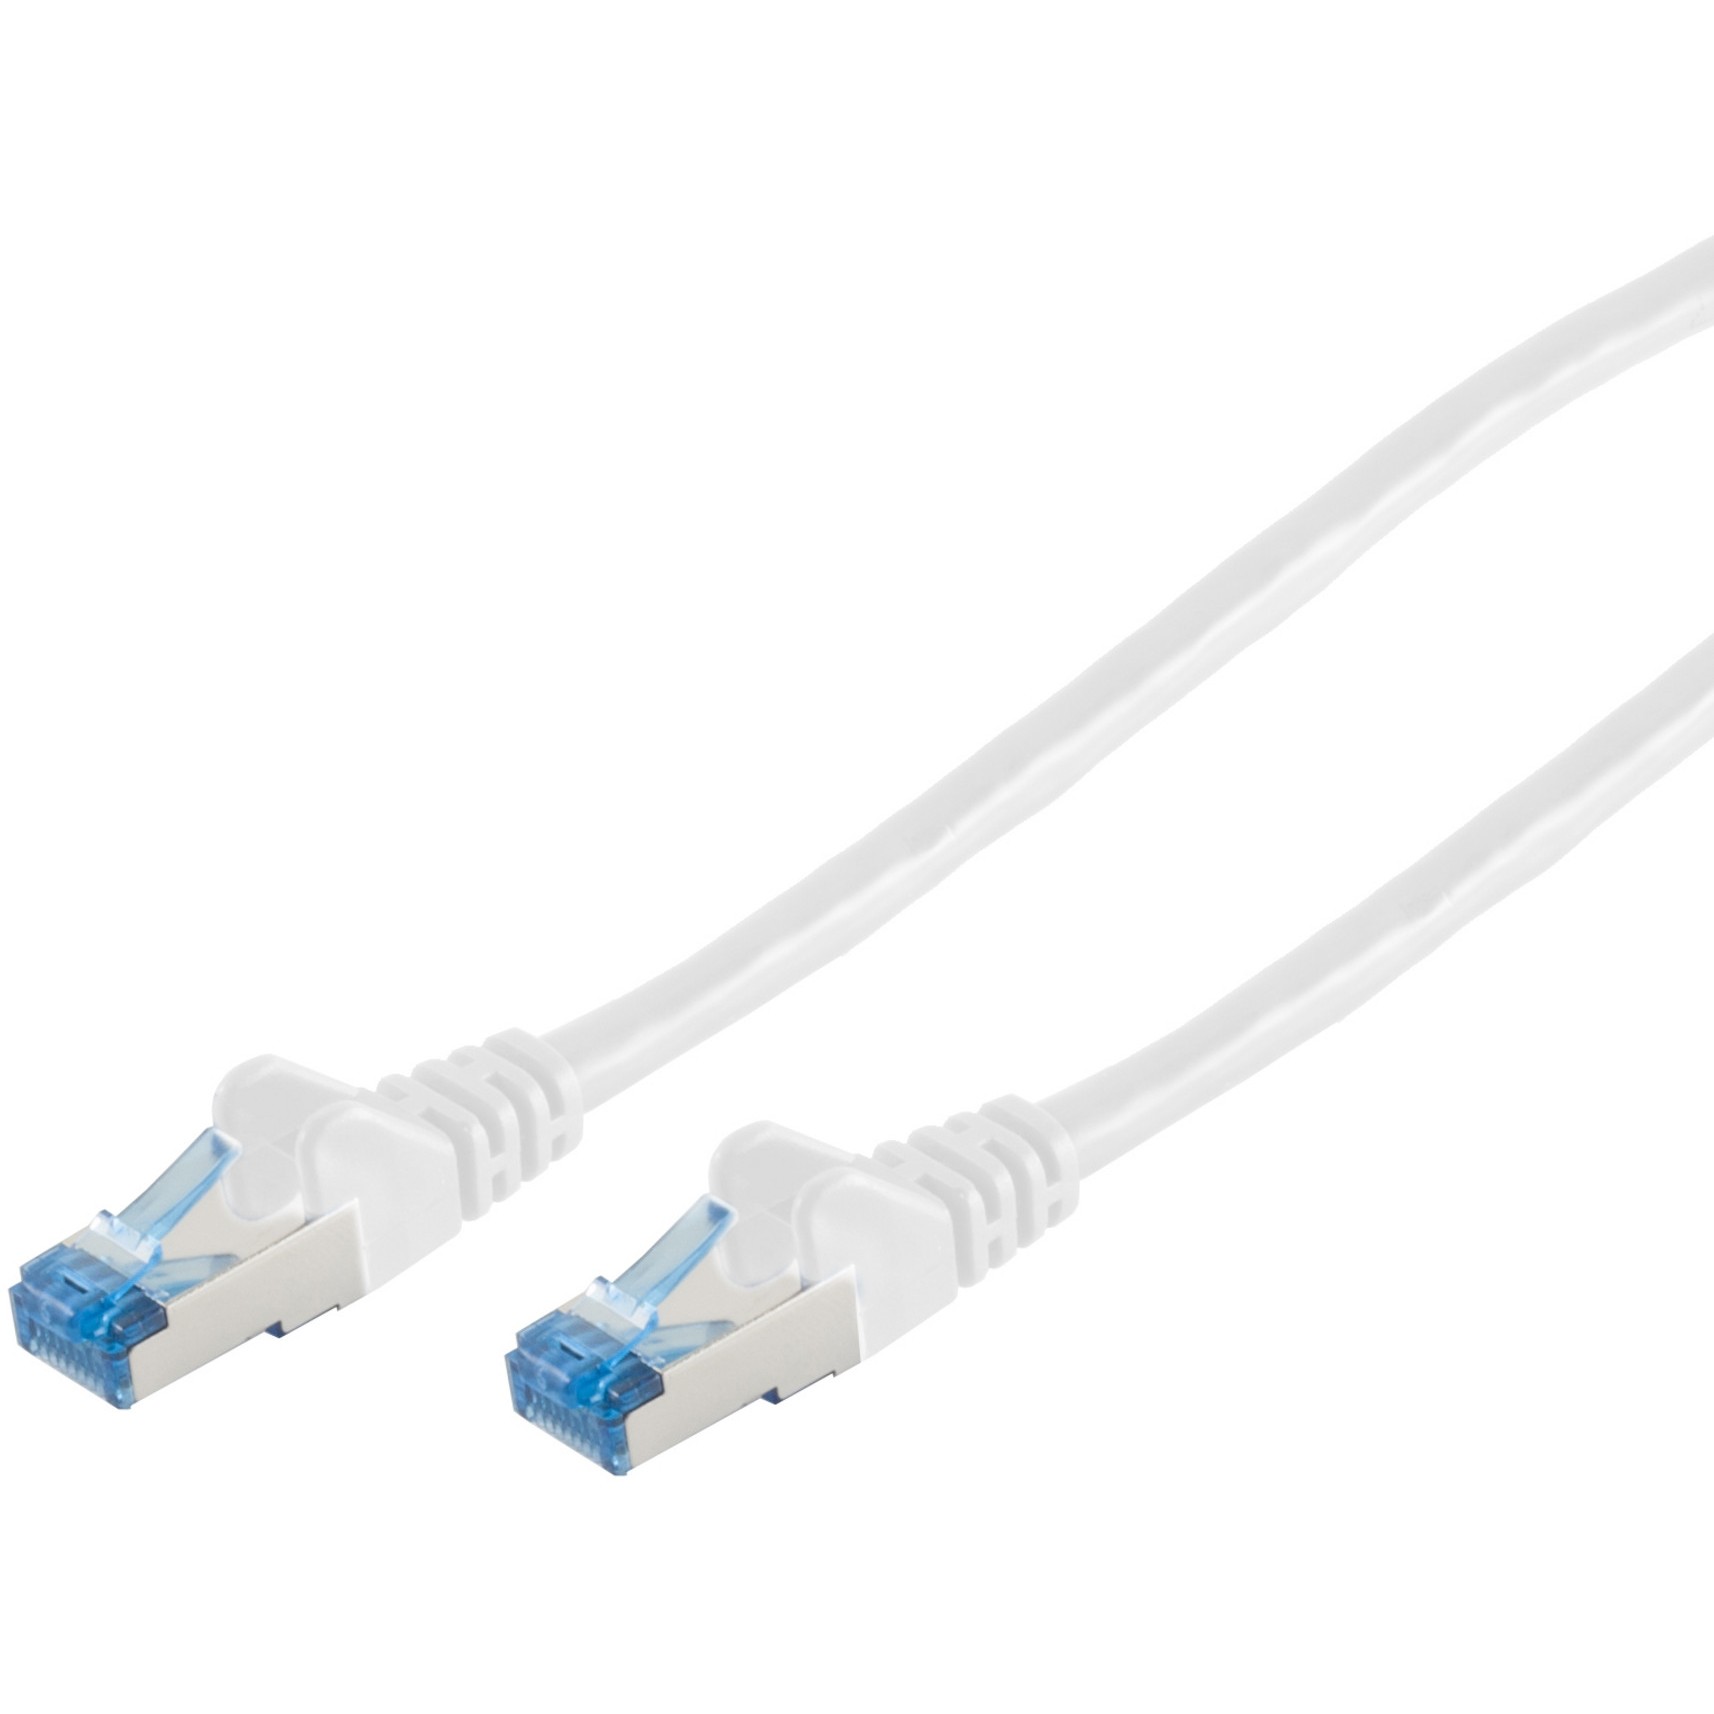 S-Conn 75725-W networking cable - 75725-W